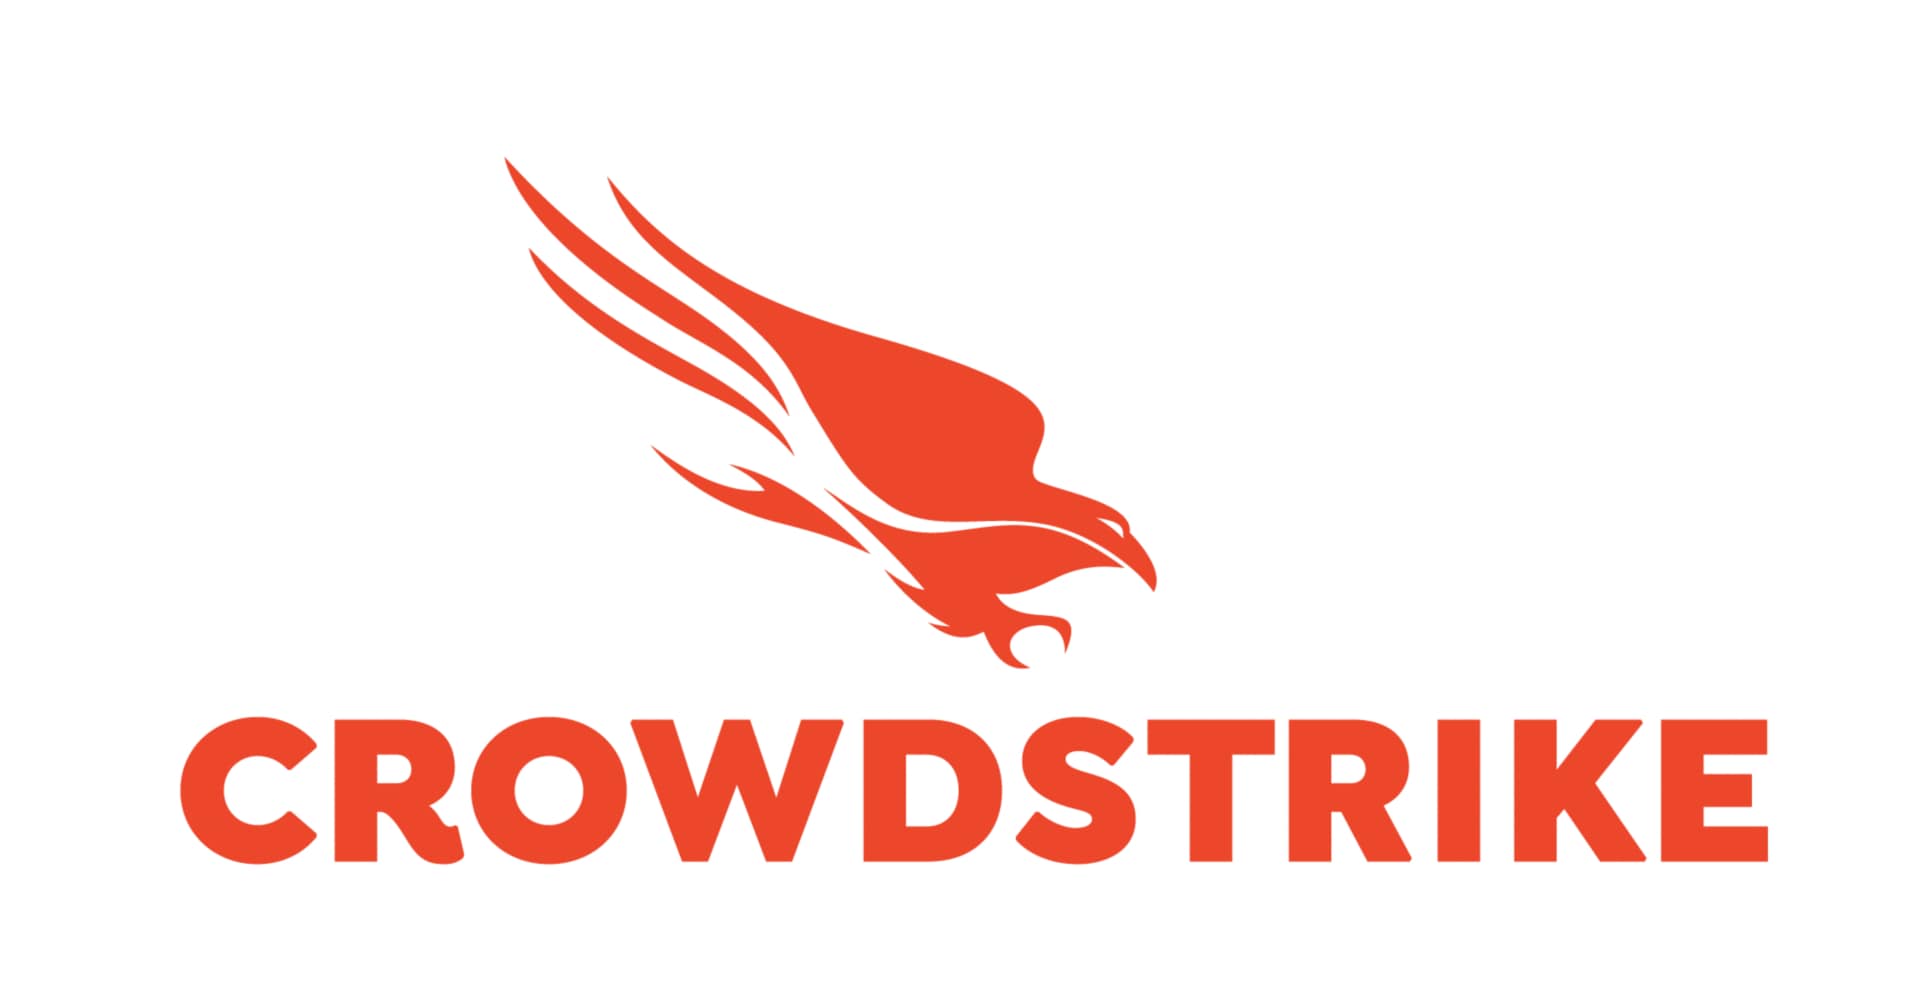 CrowdStrike 8-Month Humio Cloud for Falcon 365 Day Retention Software Subscription